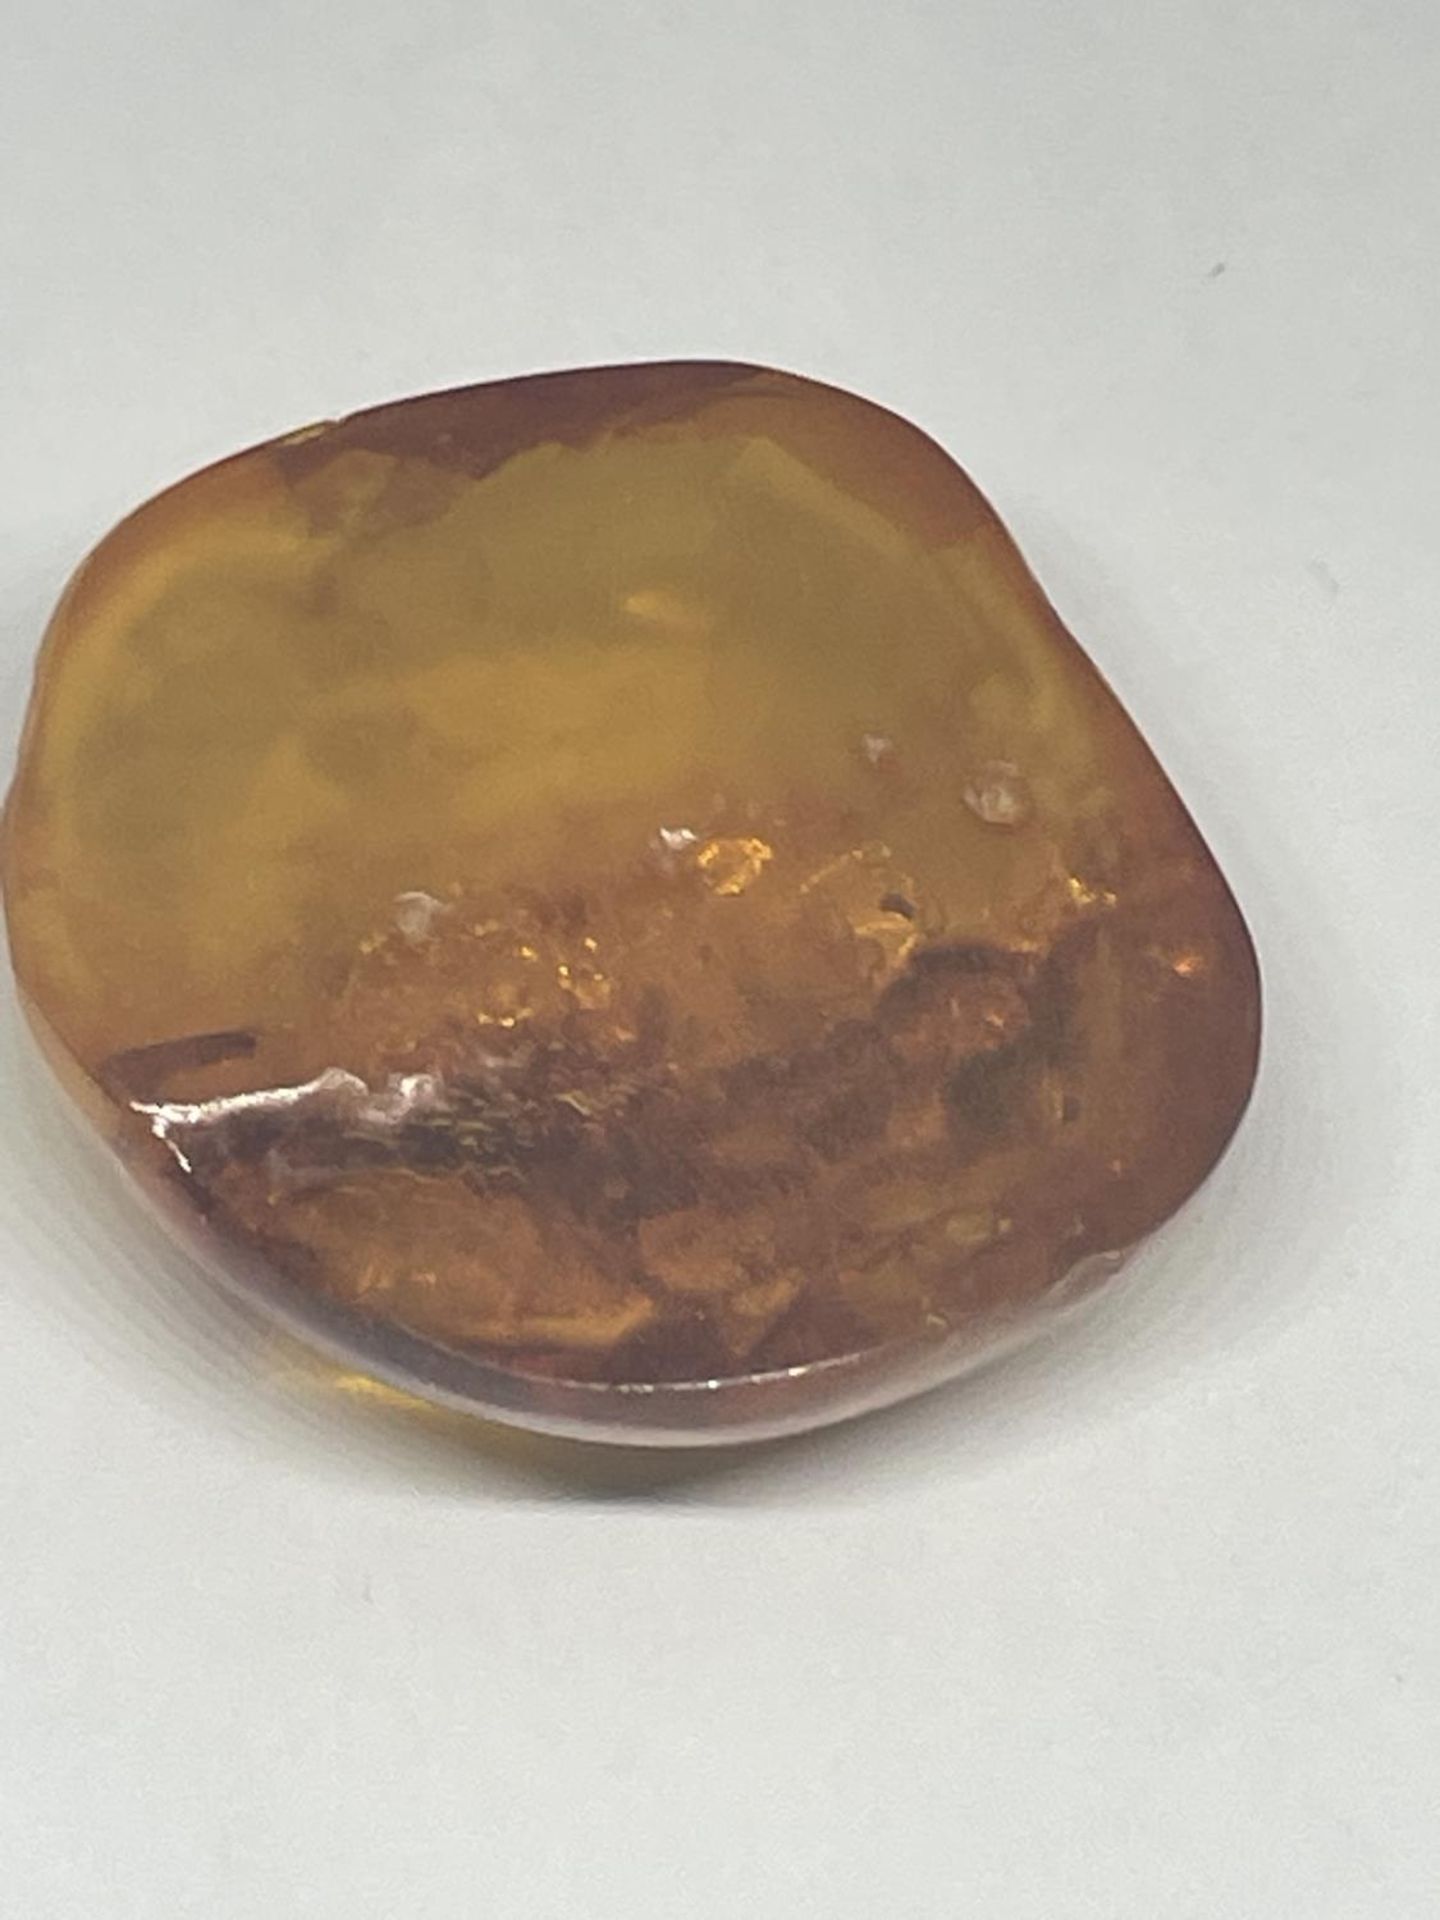 A LARGE PIECE OF AMBER APPROXIMATLEY 4CM X 3.5CM - Image 2 of 2